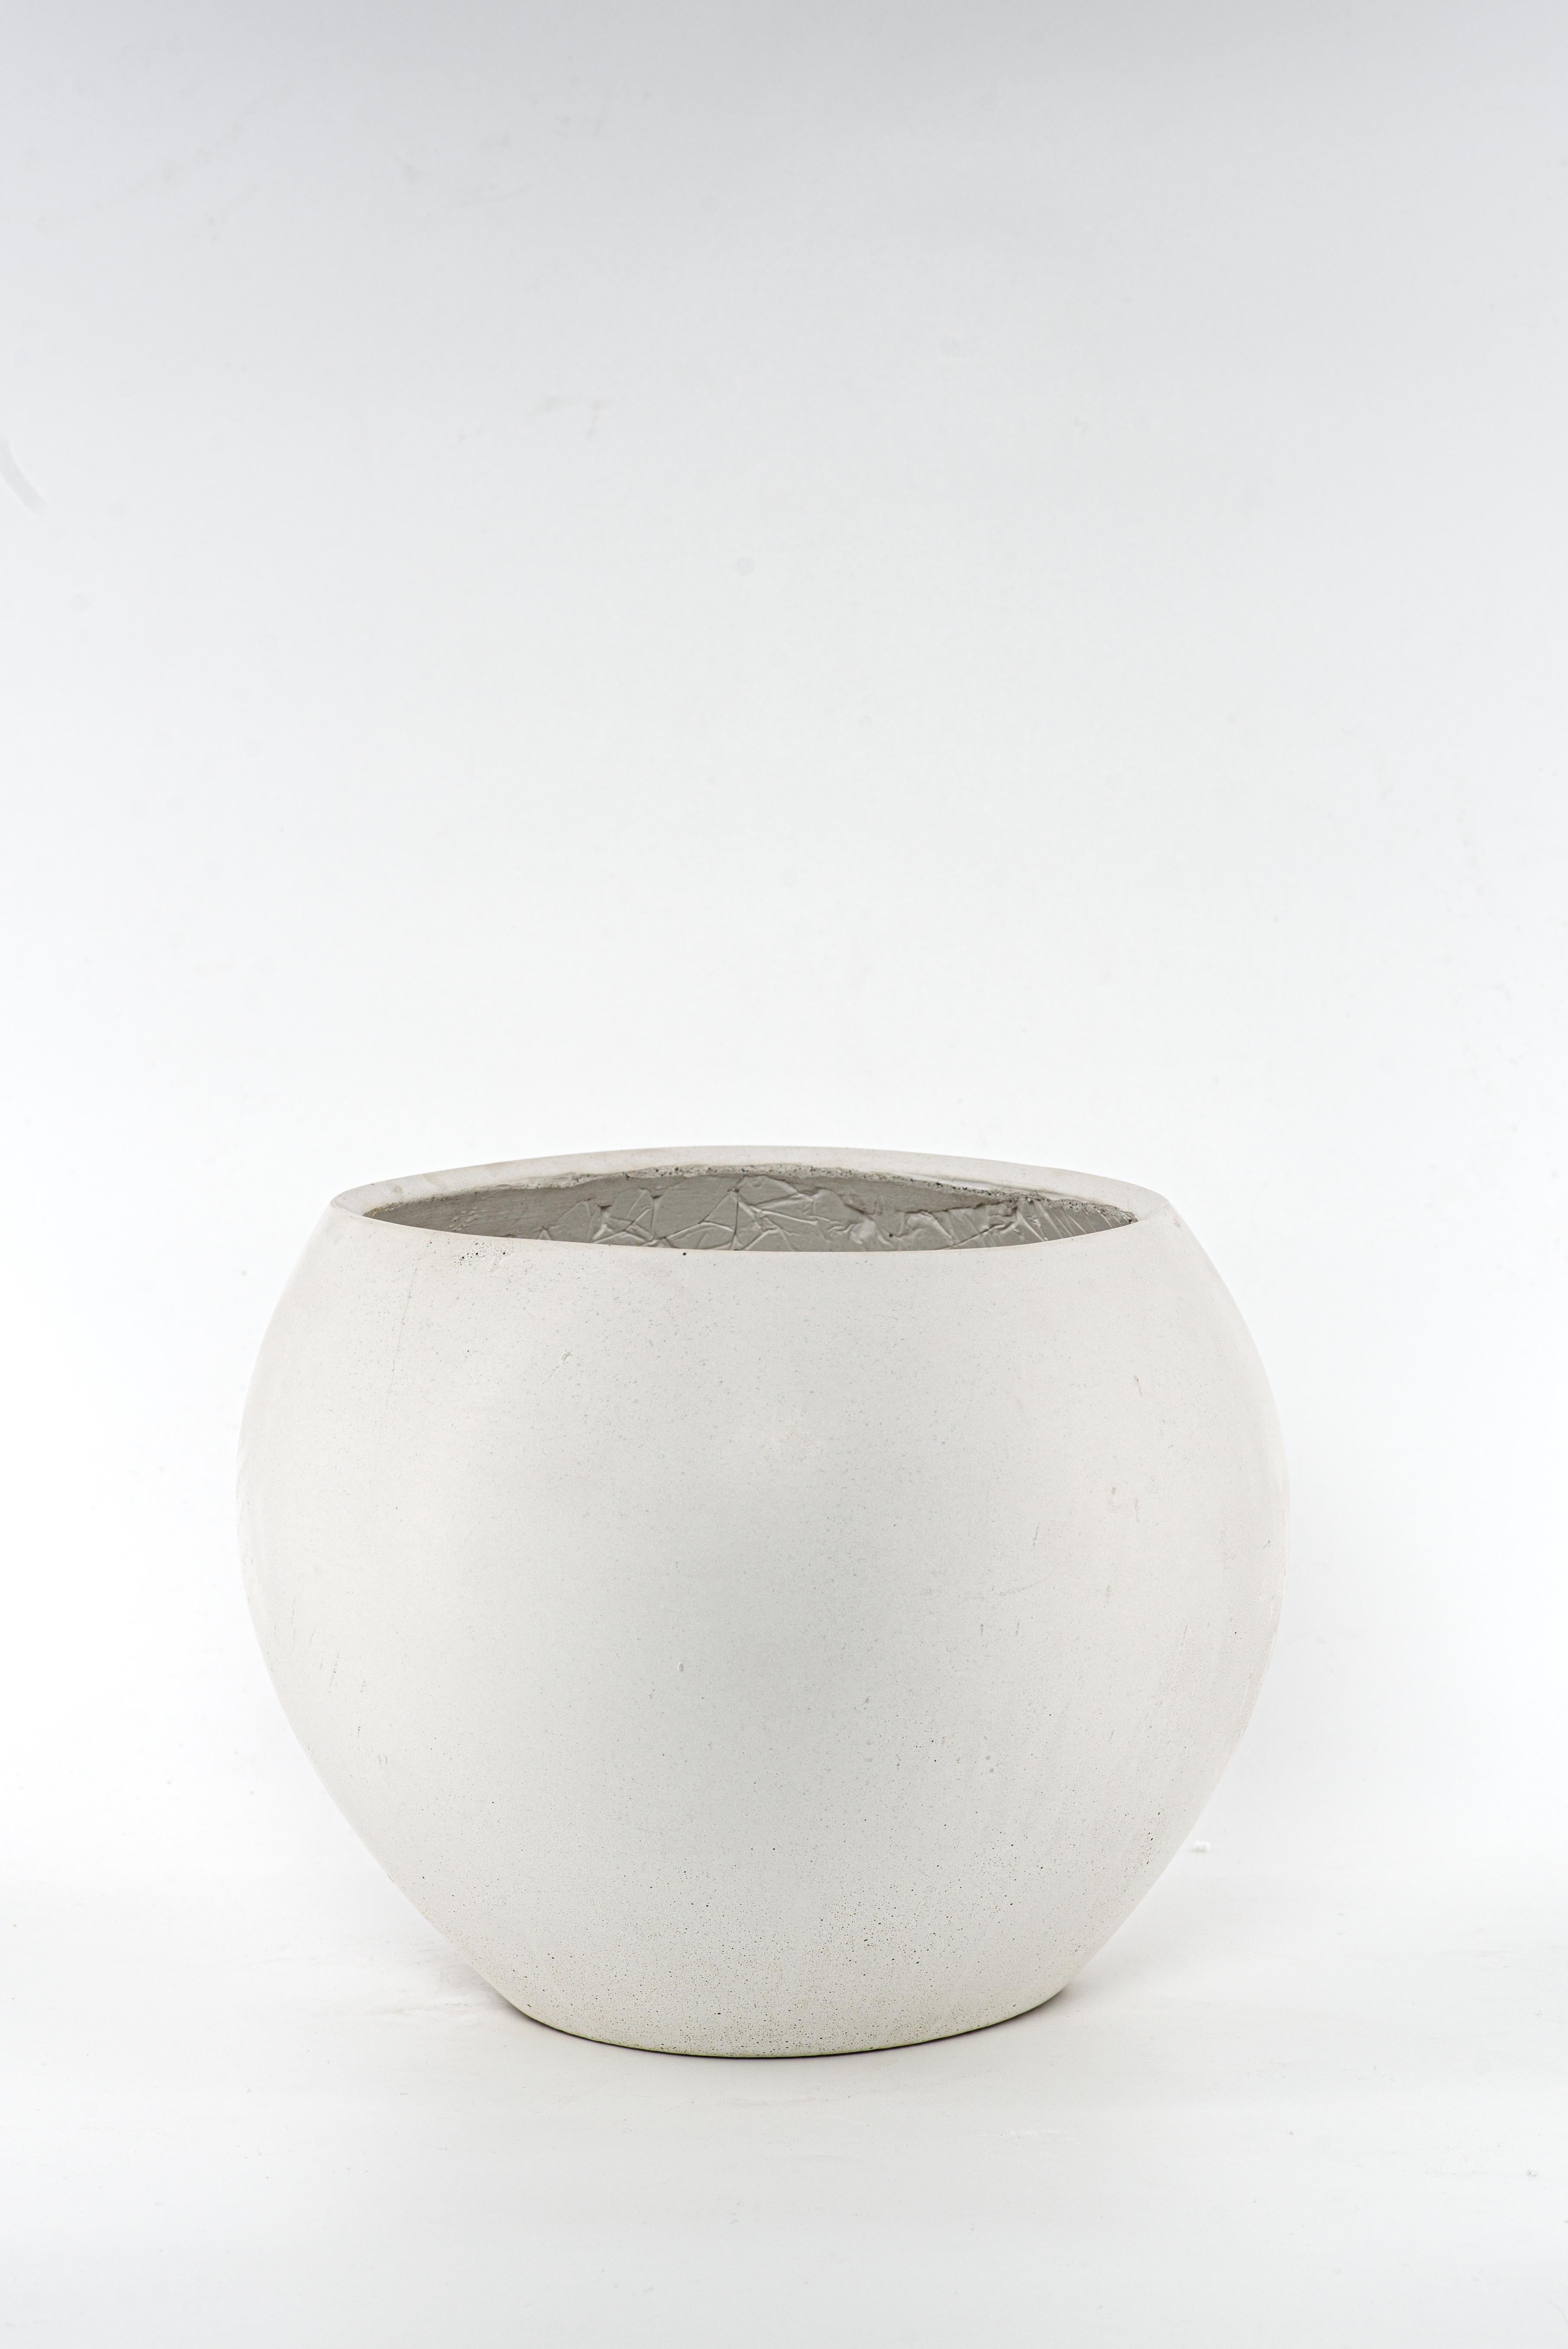 The Zazen line combines organic shapes with the texture of concrete, giving life to a family of four highly recognizable vases.
Each vase is produced from a monolithic concrete casting. The design of Zazen makes it possible to reduce thickness to a